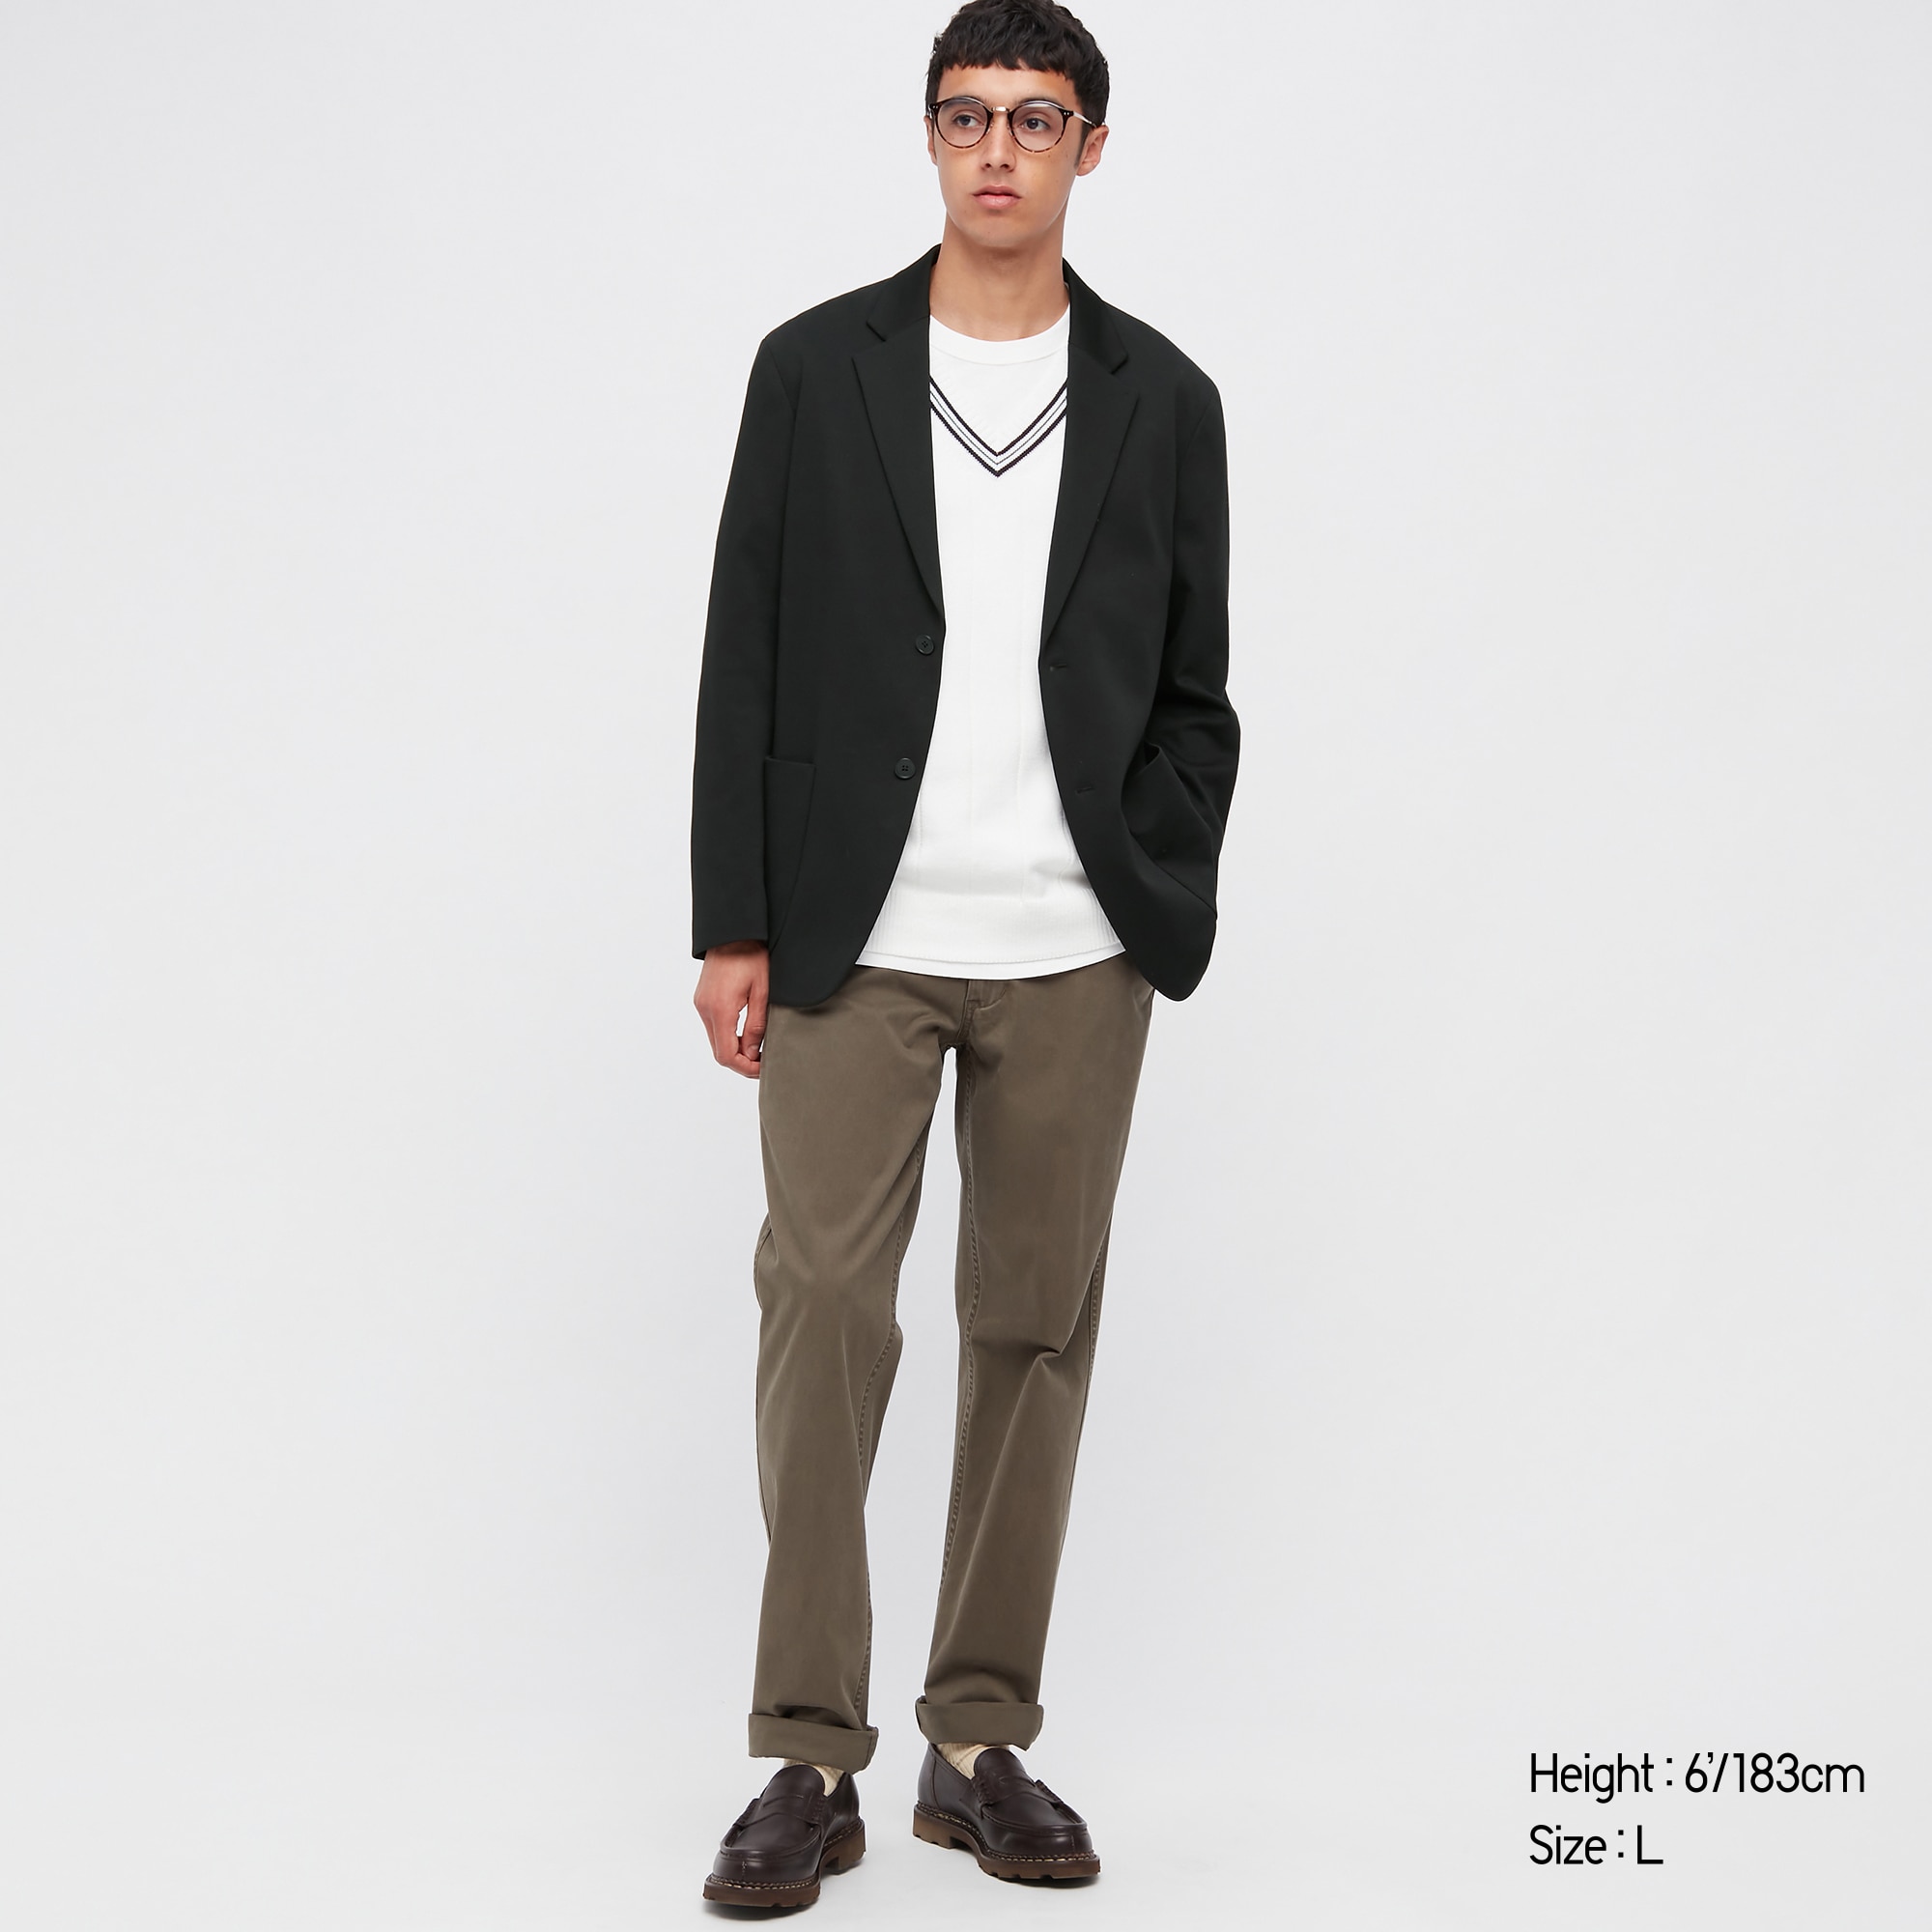 UNIQLO Winter TryOn Haul Mens Style Inspiration  Gentleman Within